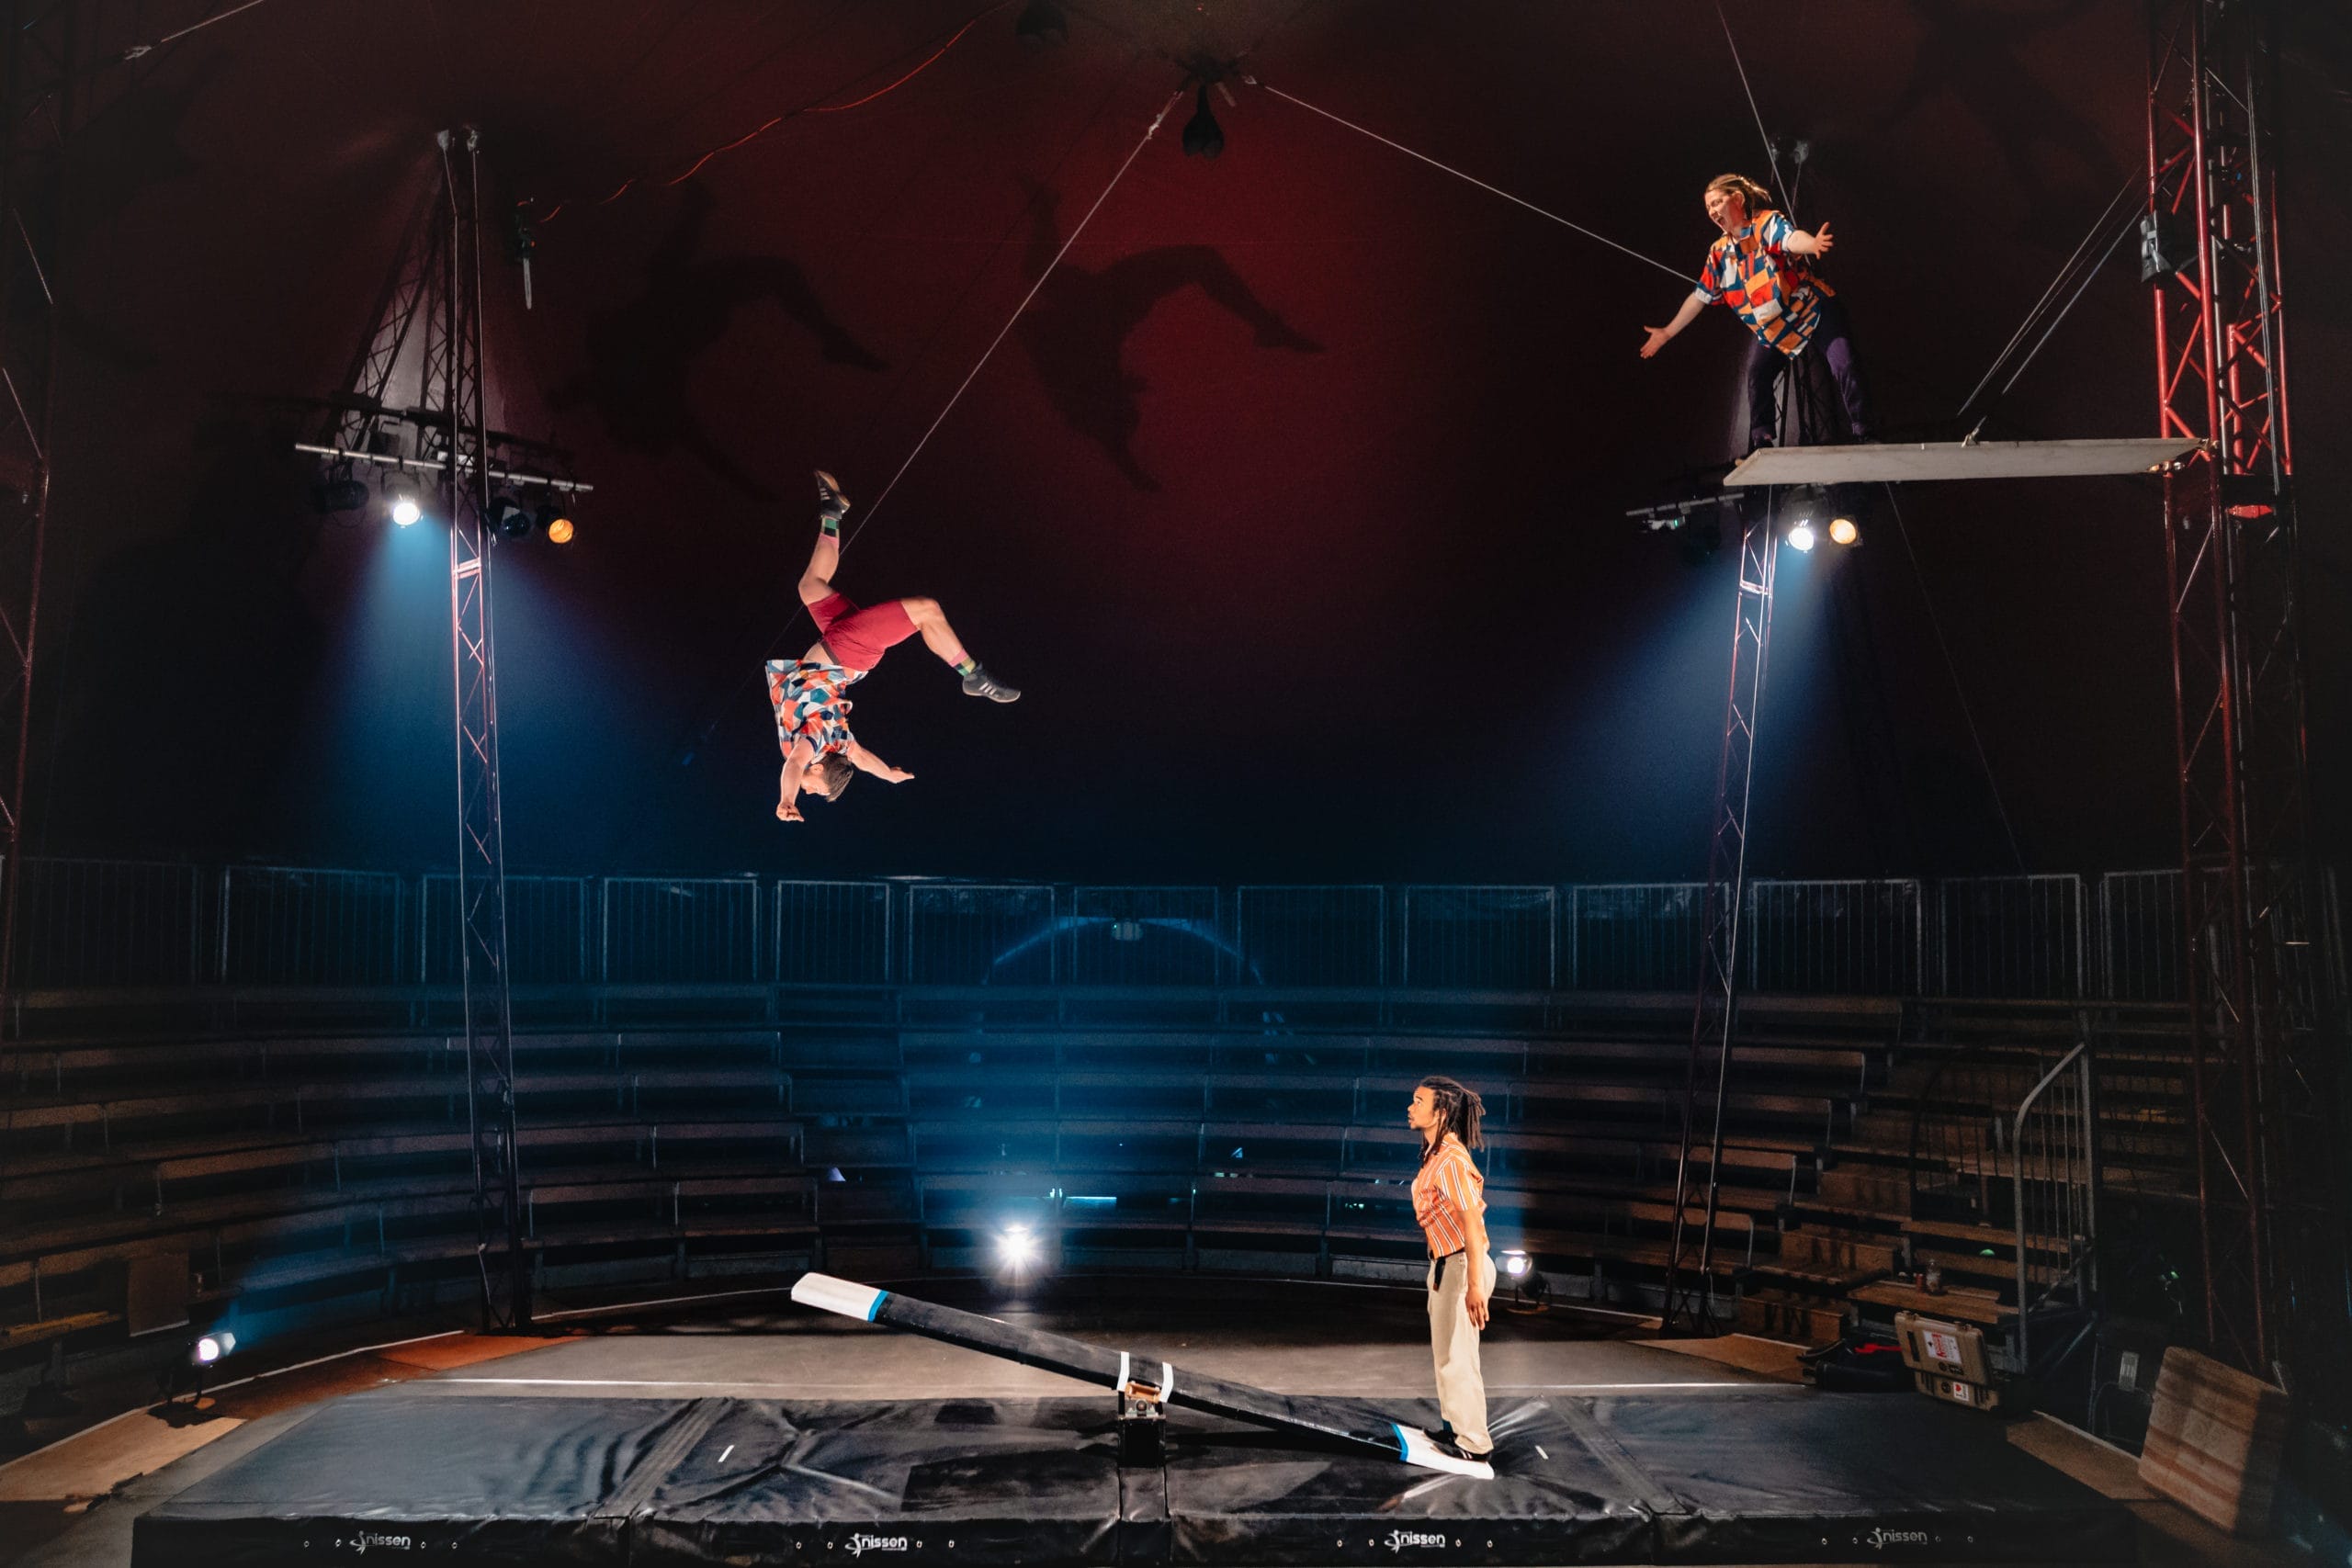 Three Revel Puck circus performers engage in an impressive stunt. One performer stands on the end of a small seesaw, whilst another is catapulted high into the air, and is performing a backflip upside down. A third performer stands on a plank suspended high in the air, ready to catch their fellow performer.